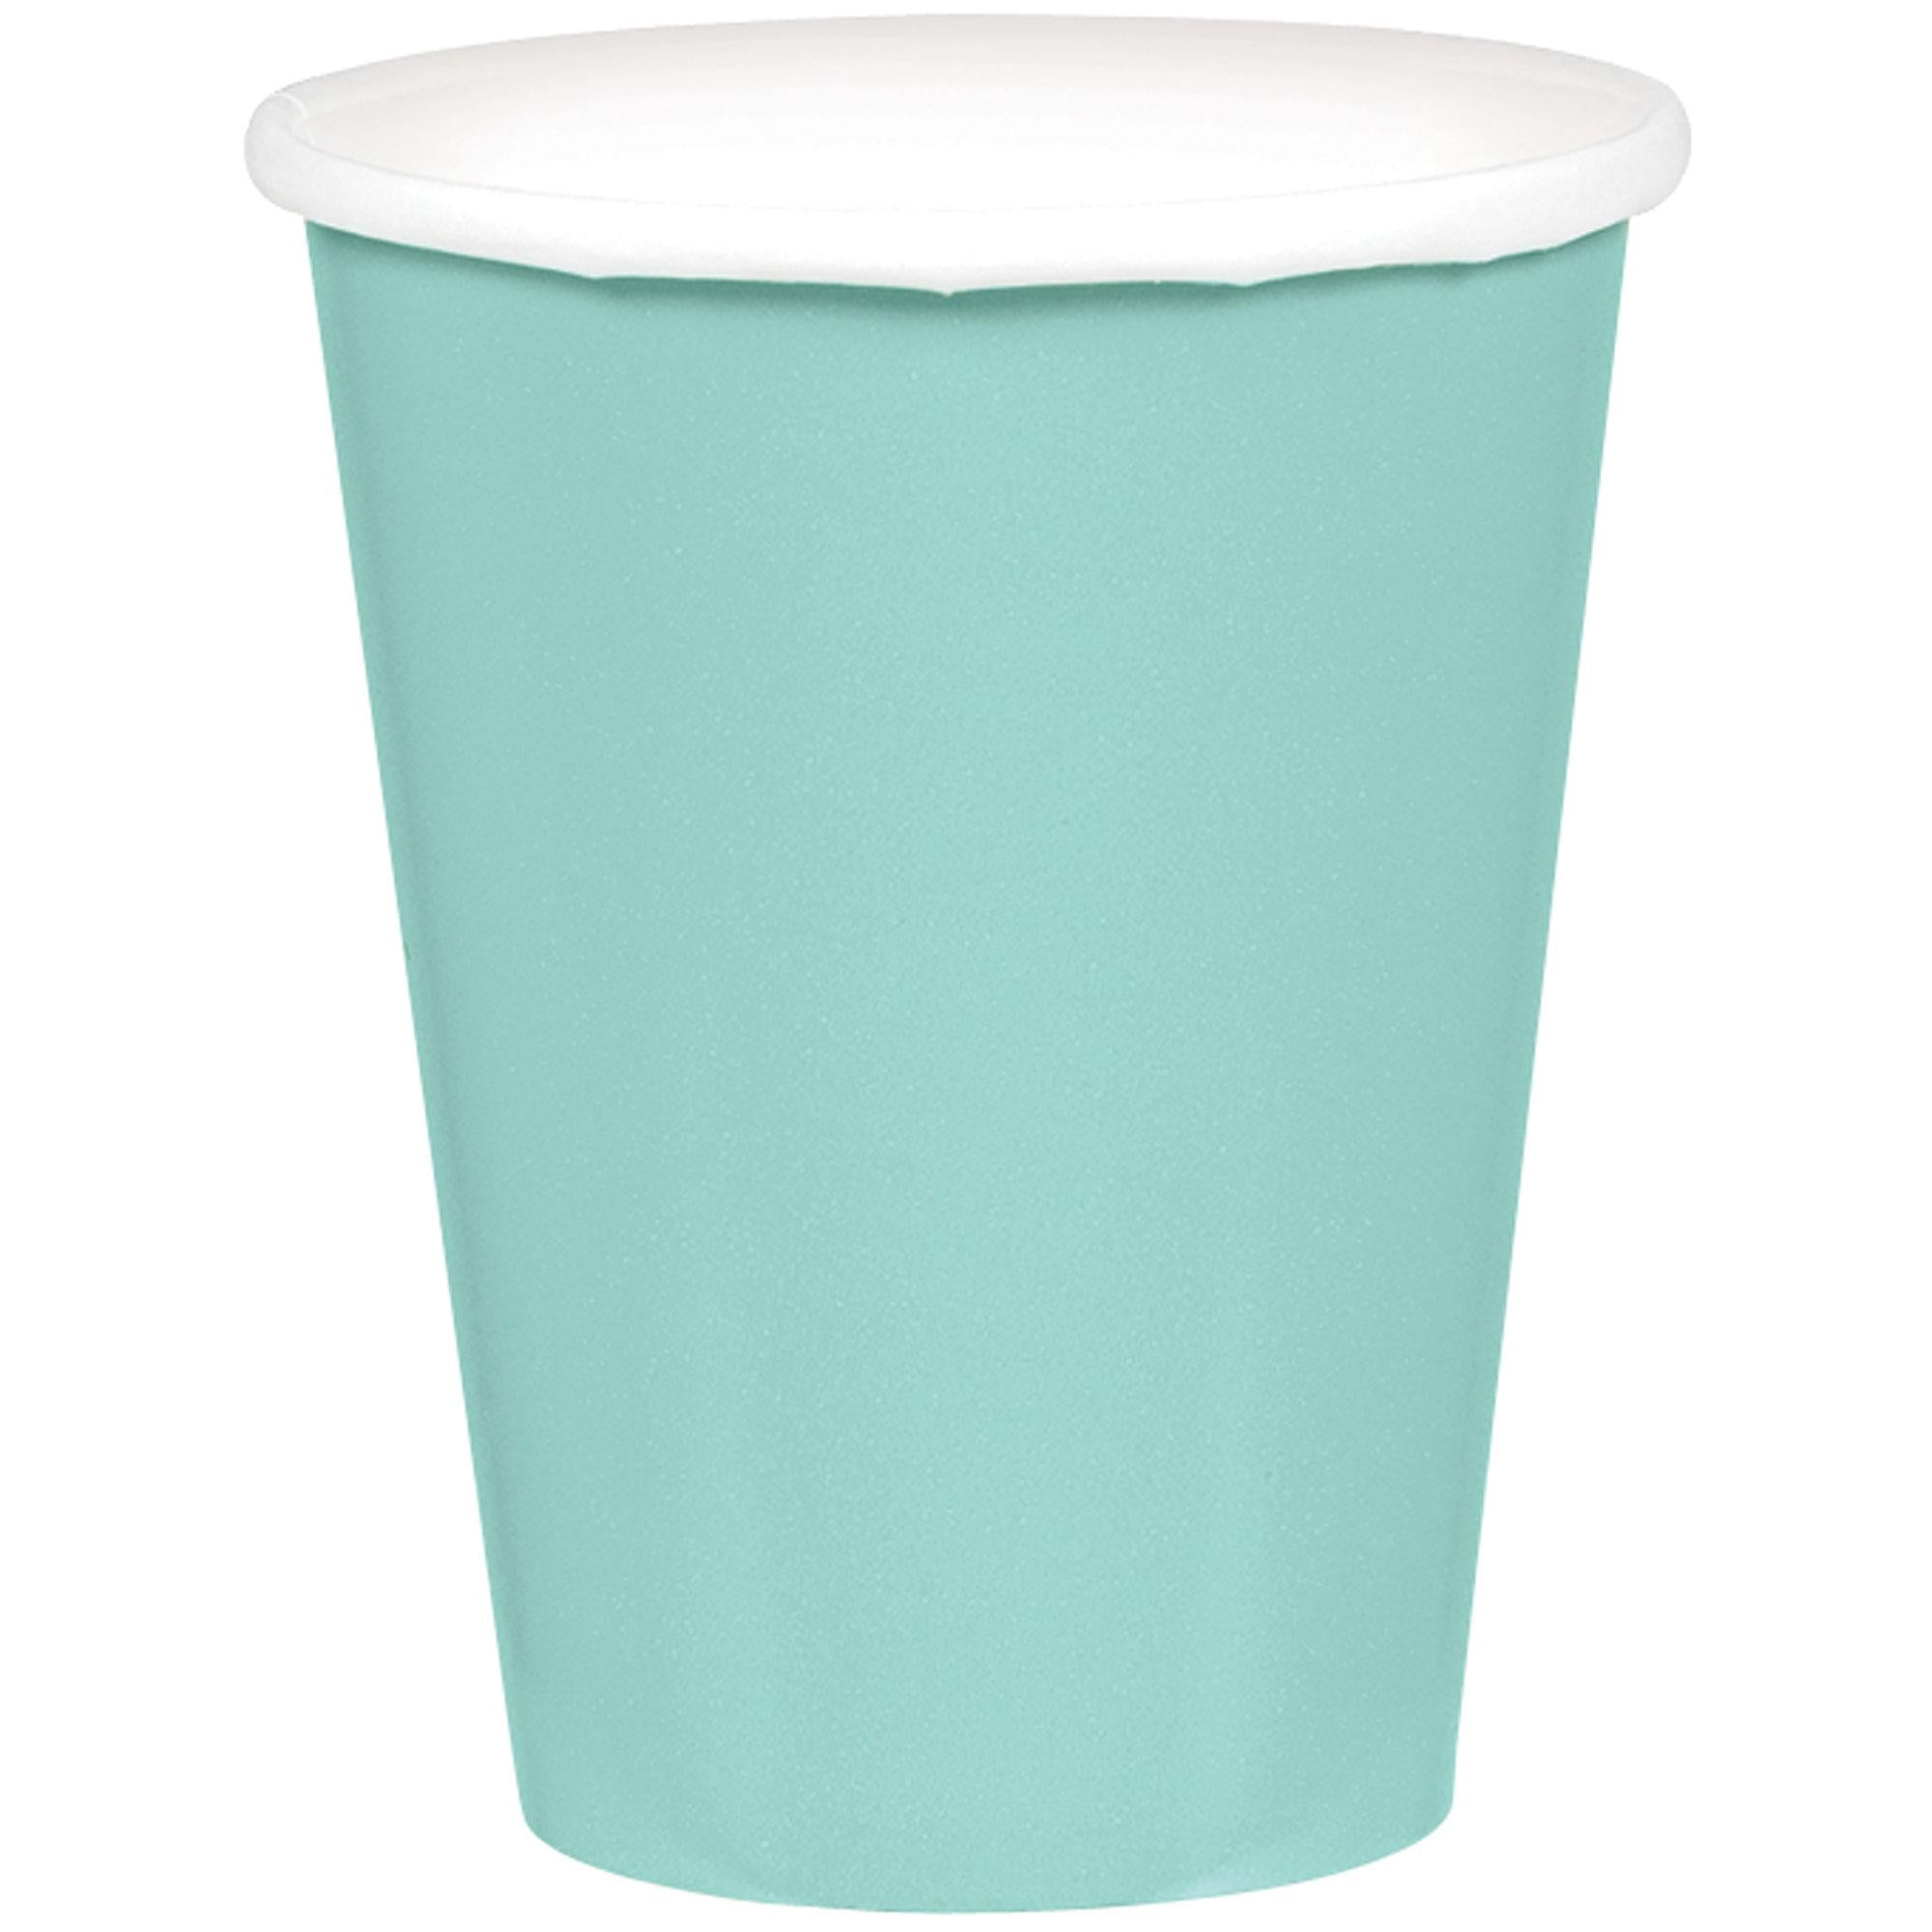 Robins Egg Blue Party Paper Cups 9oz, 20pcs Solid Tableware - Party Centre